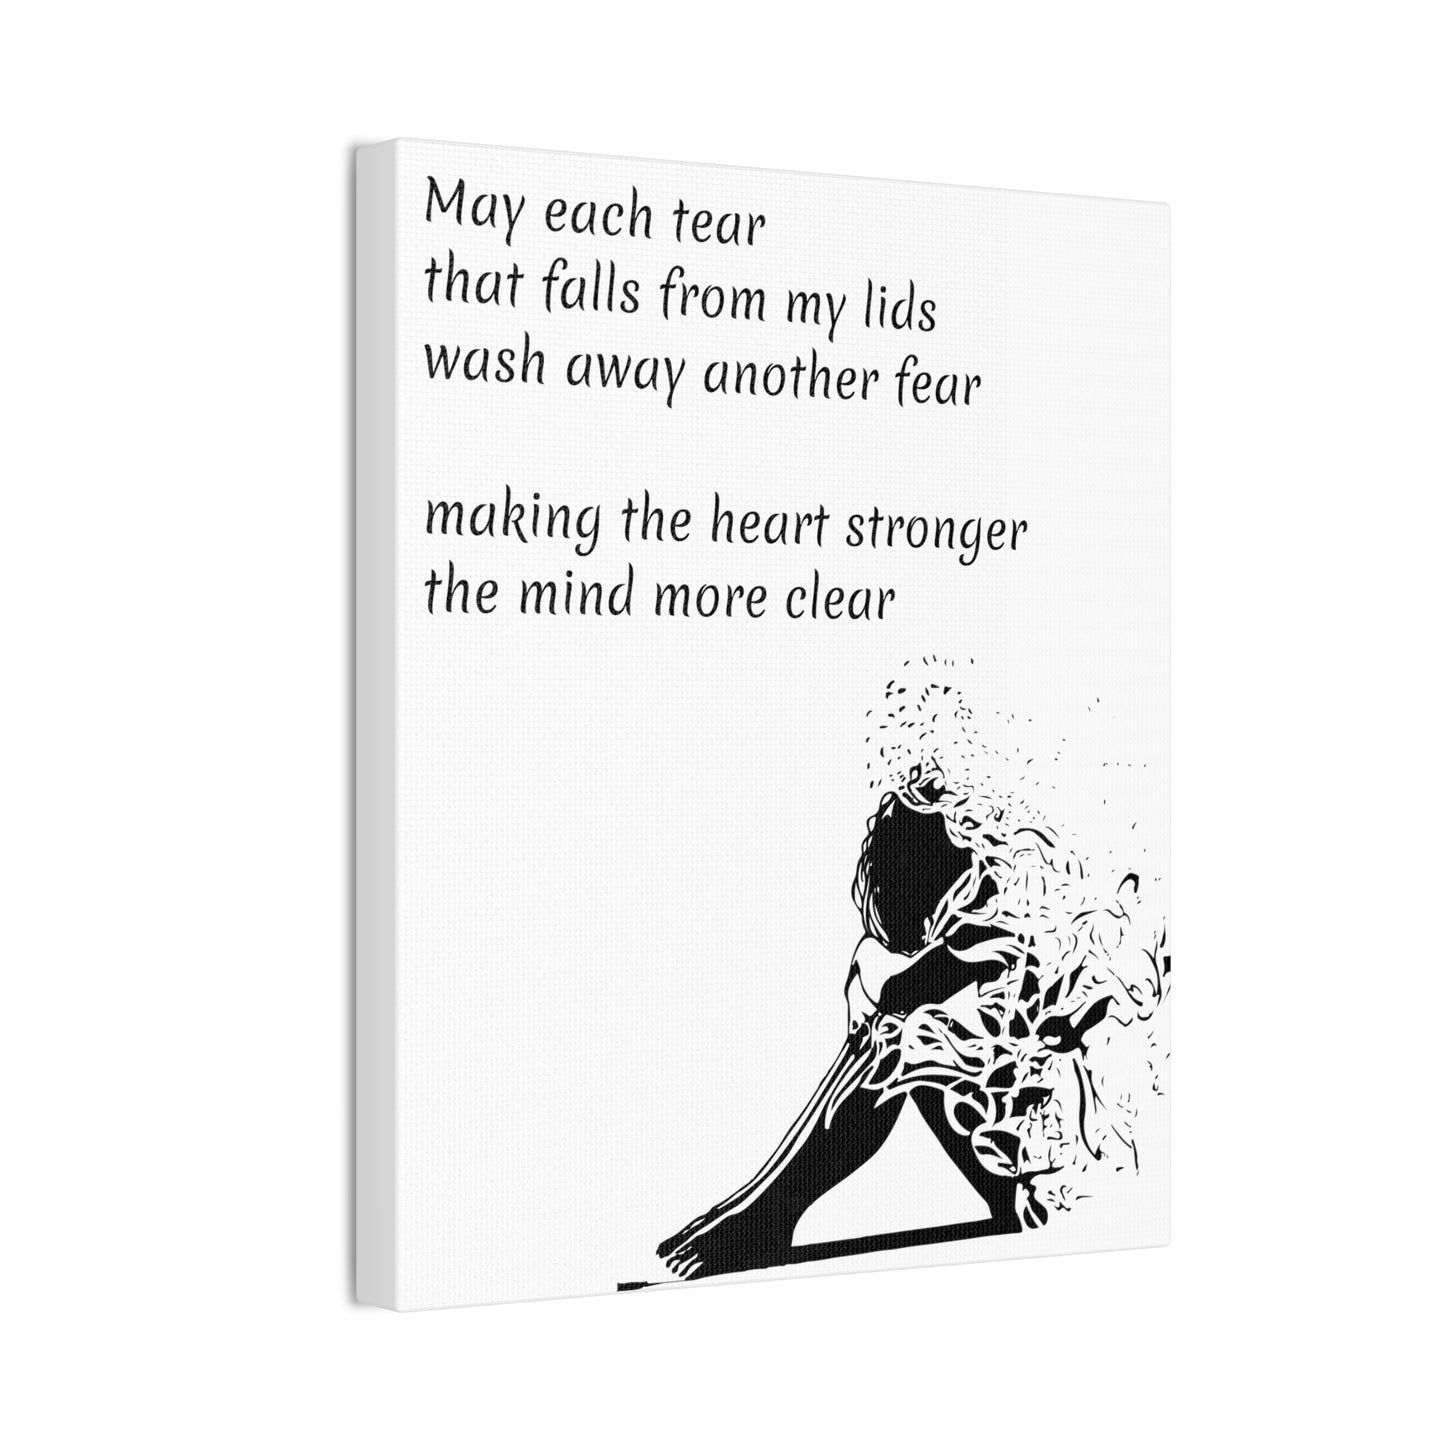 May each tear that falls - Canvas Stretched, 0.75"